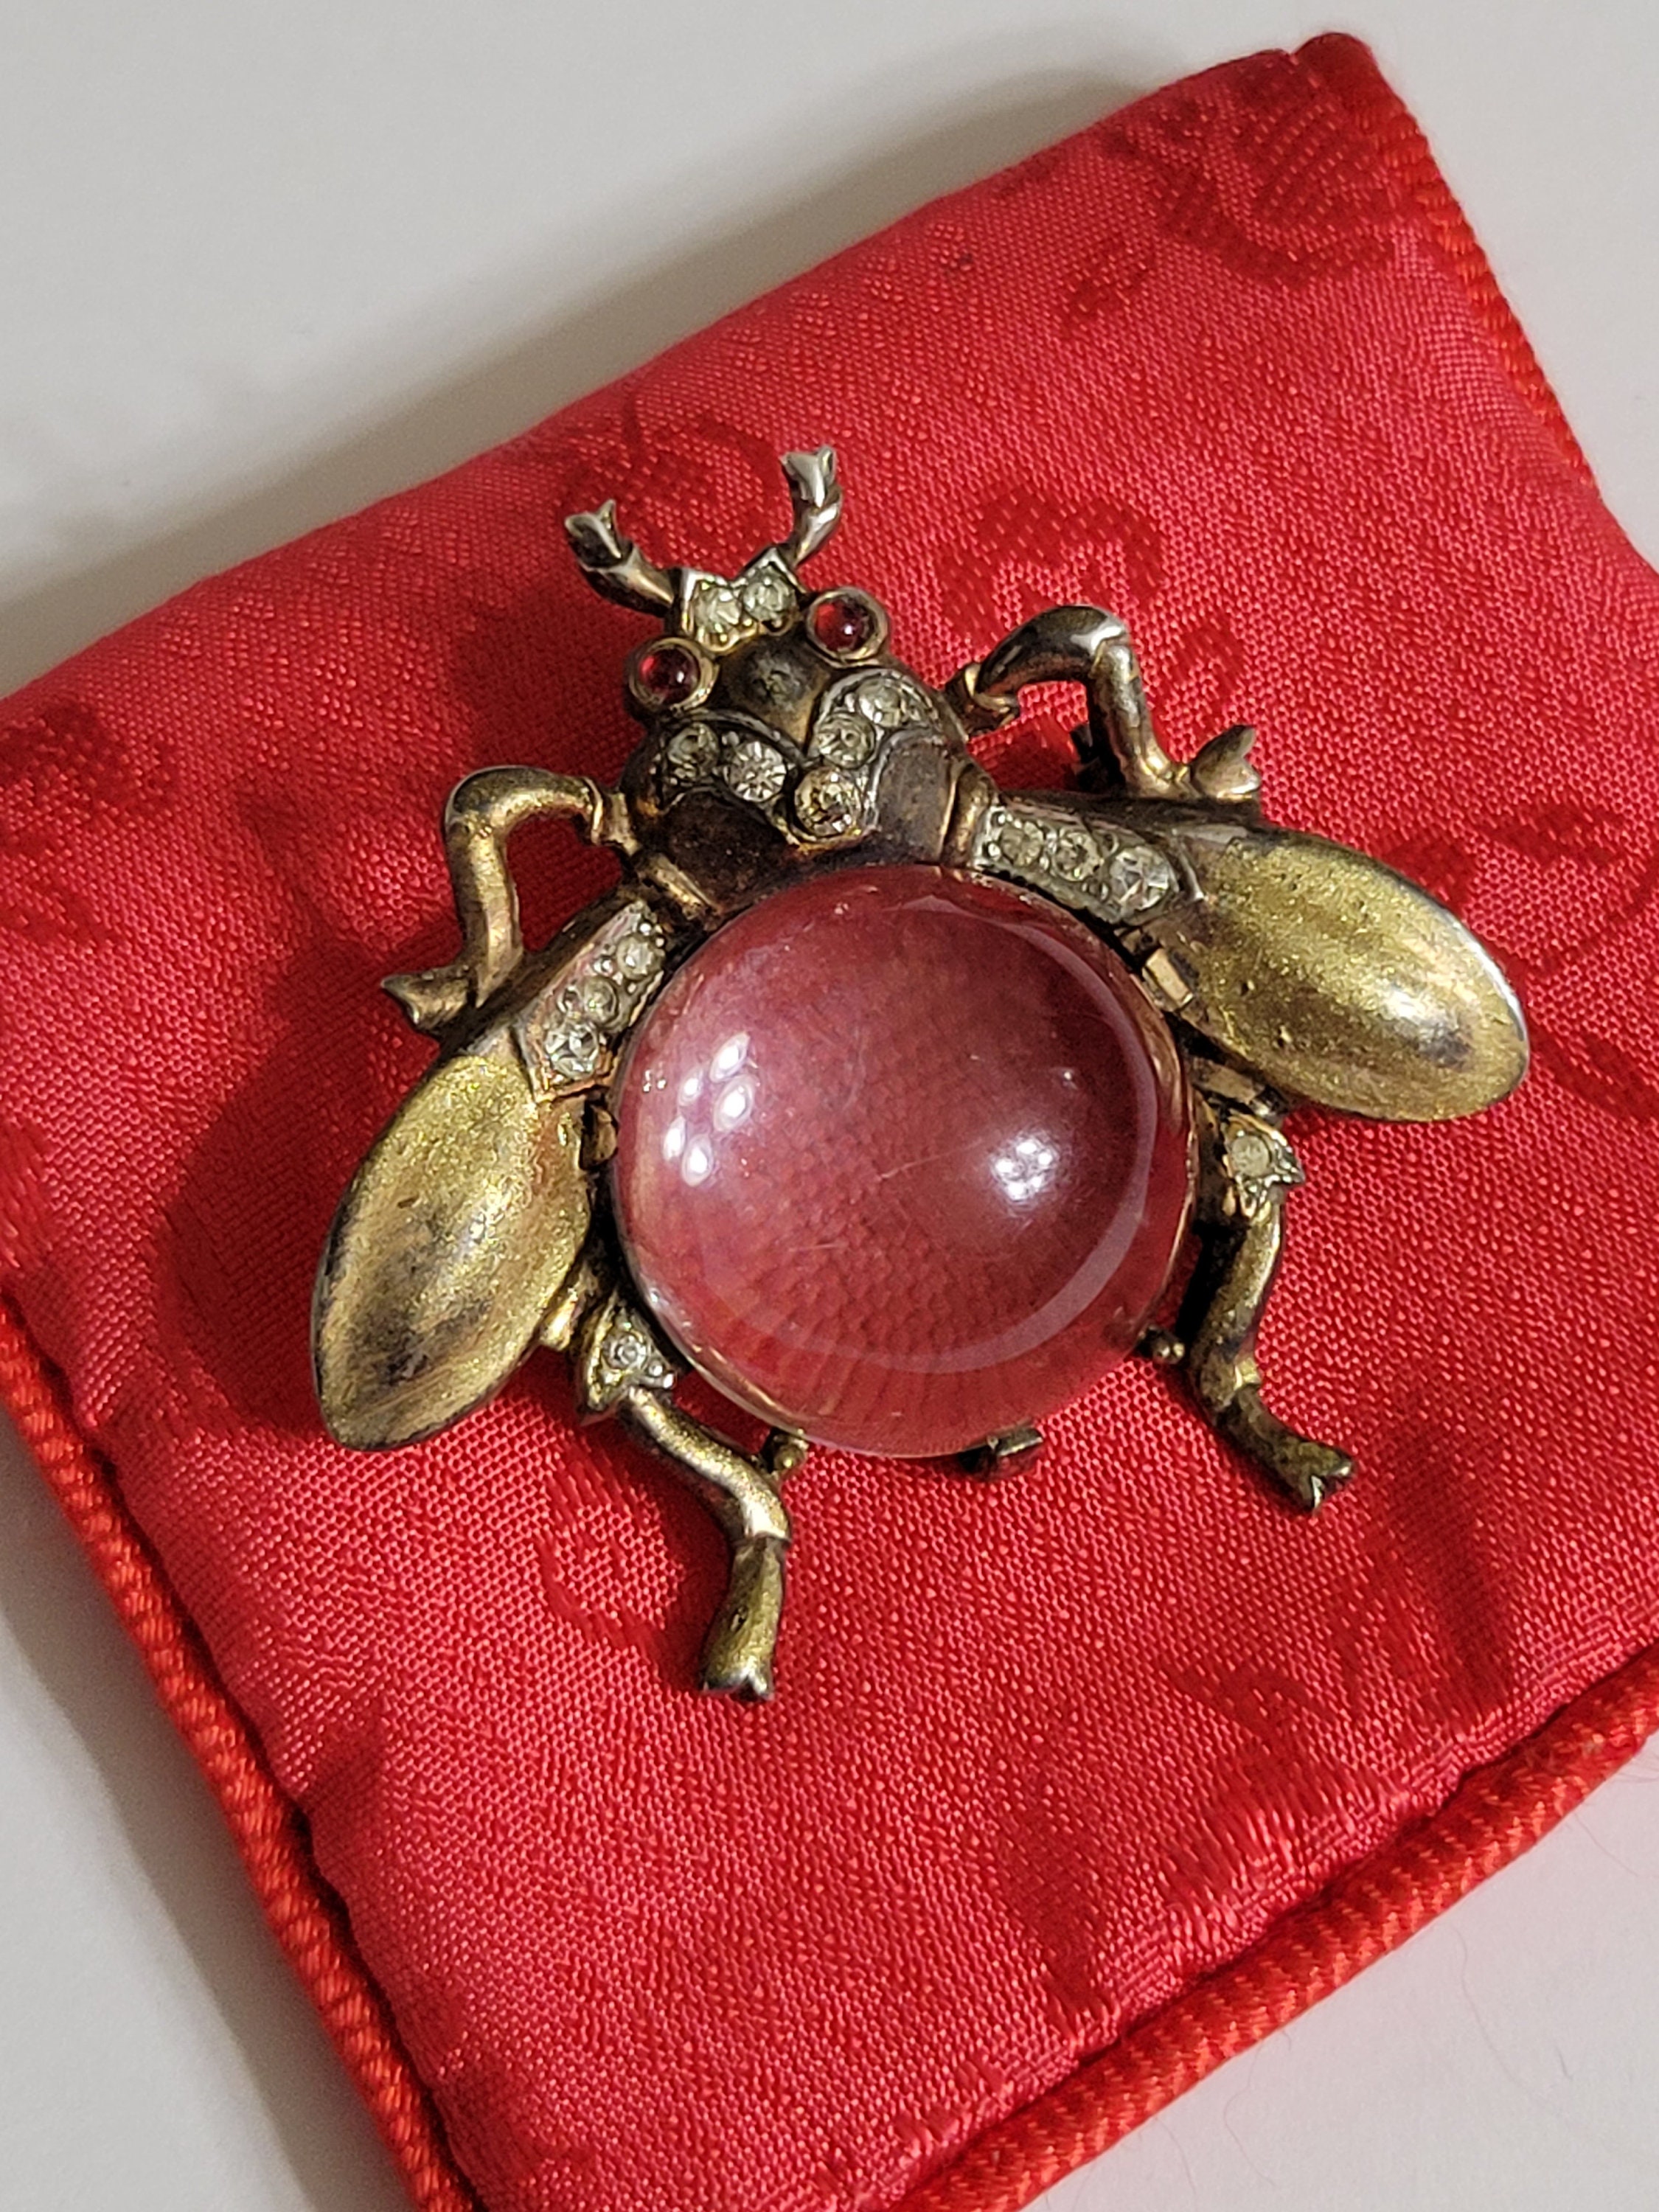 DSF Antique Jewelry Trifari 1940’s Alfred Philippe Sterling Silver Jelly Belly Spider Brooch